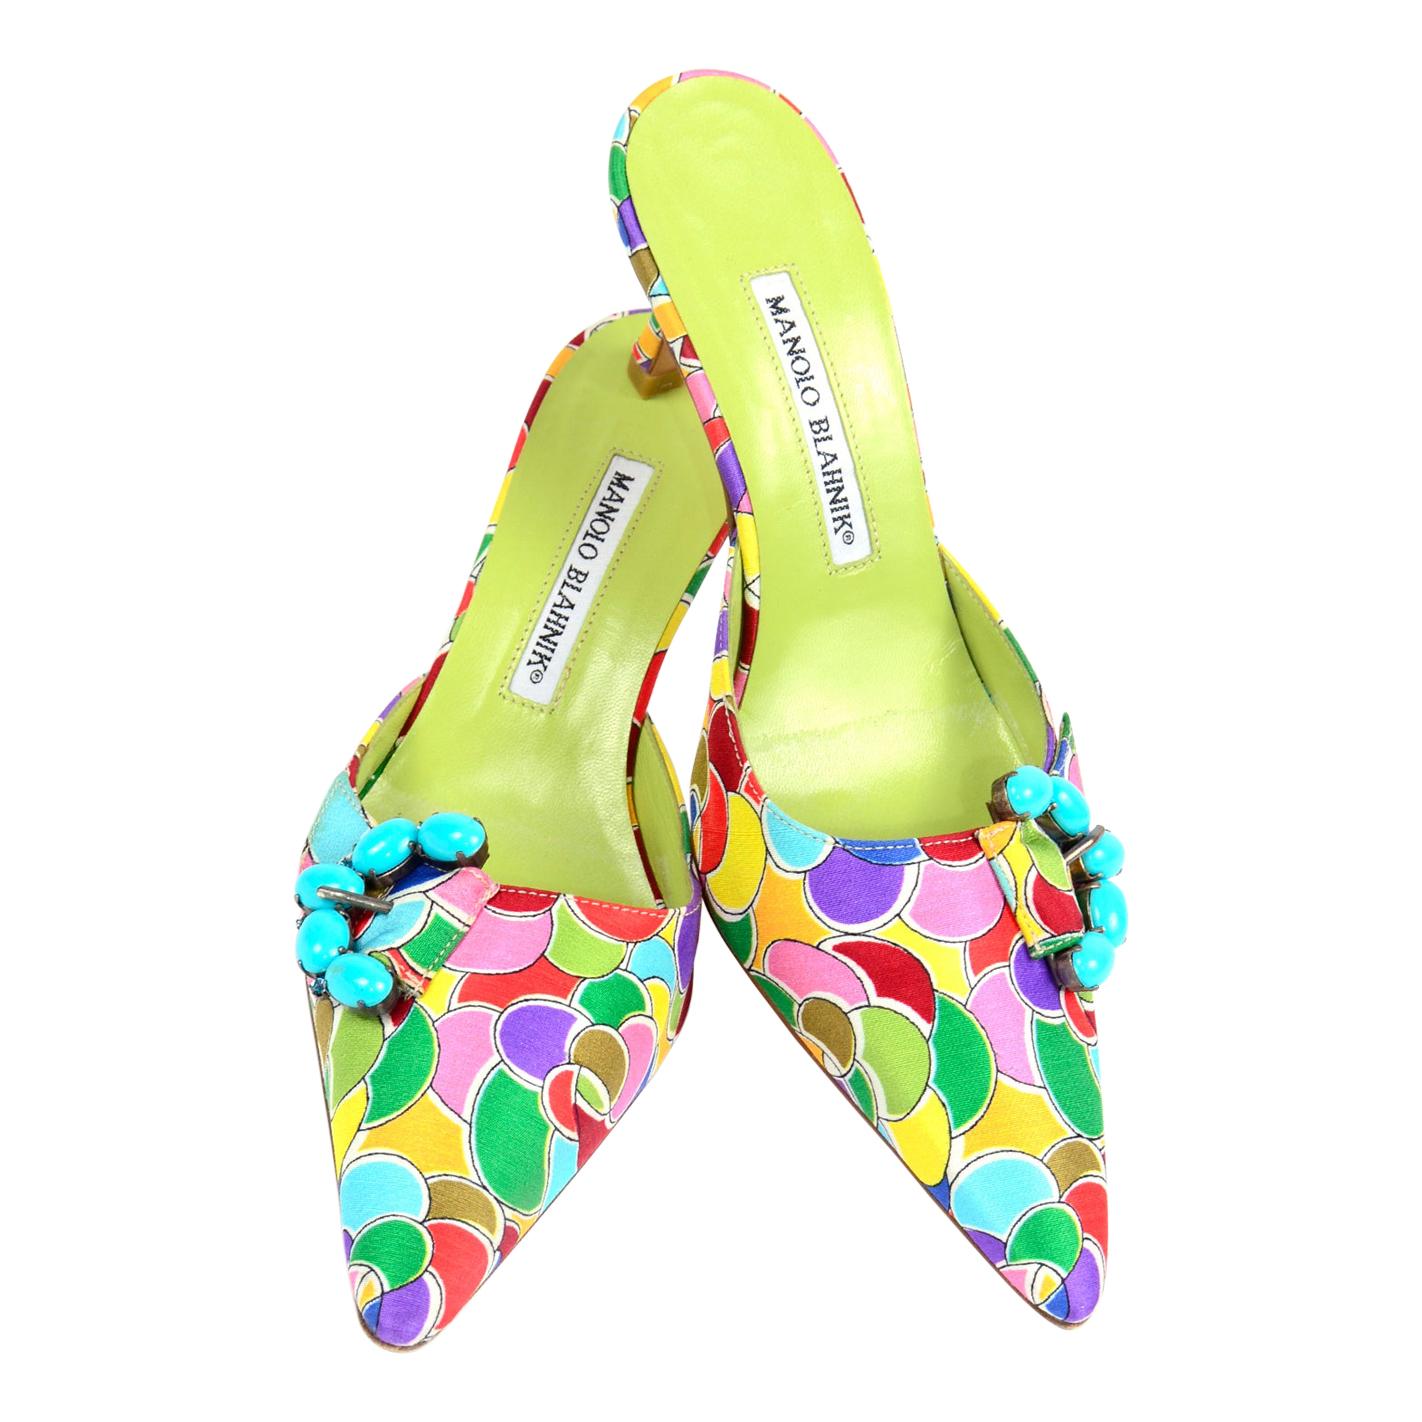 Manolo Blahnik Atomica Colorful Heeled Mules w/ Turquoise Buckle Size 36 1/2 For Sale